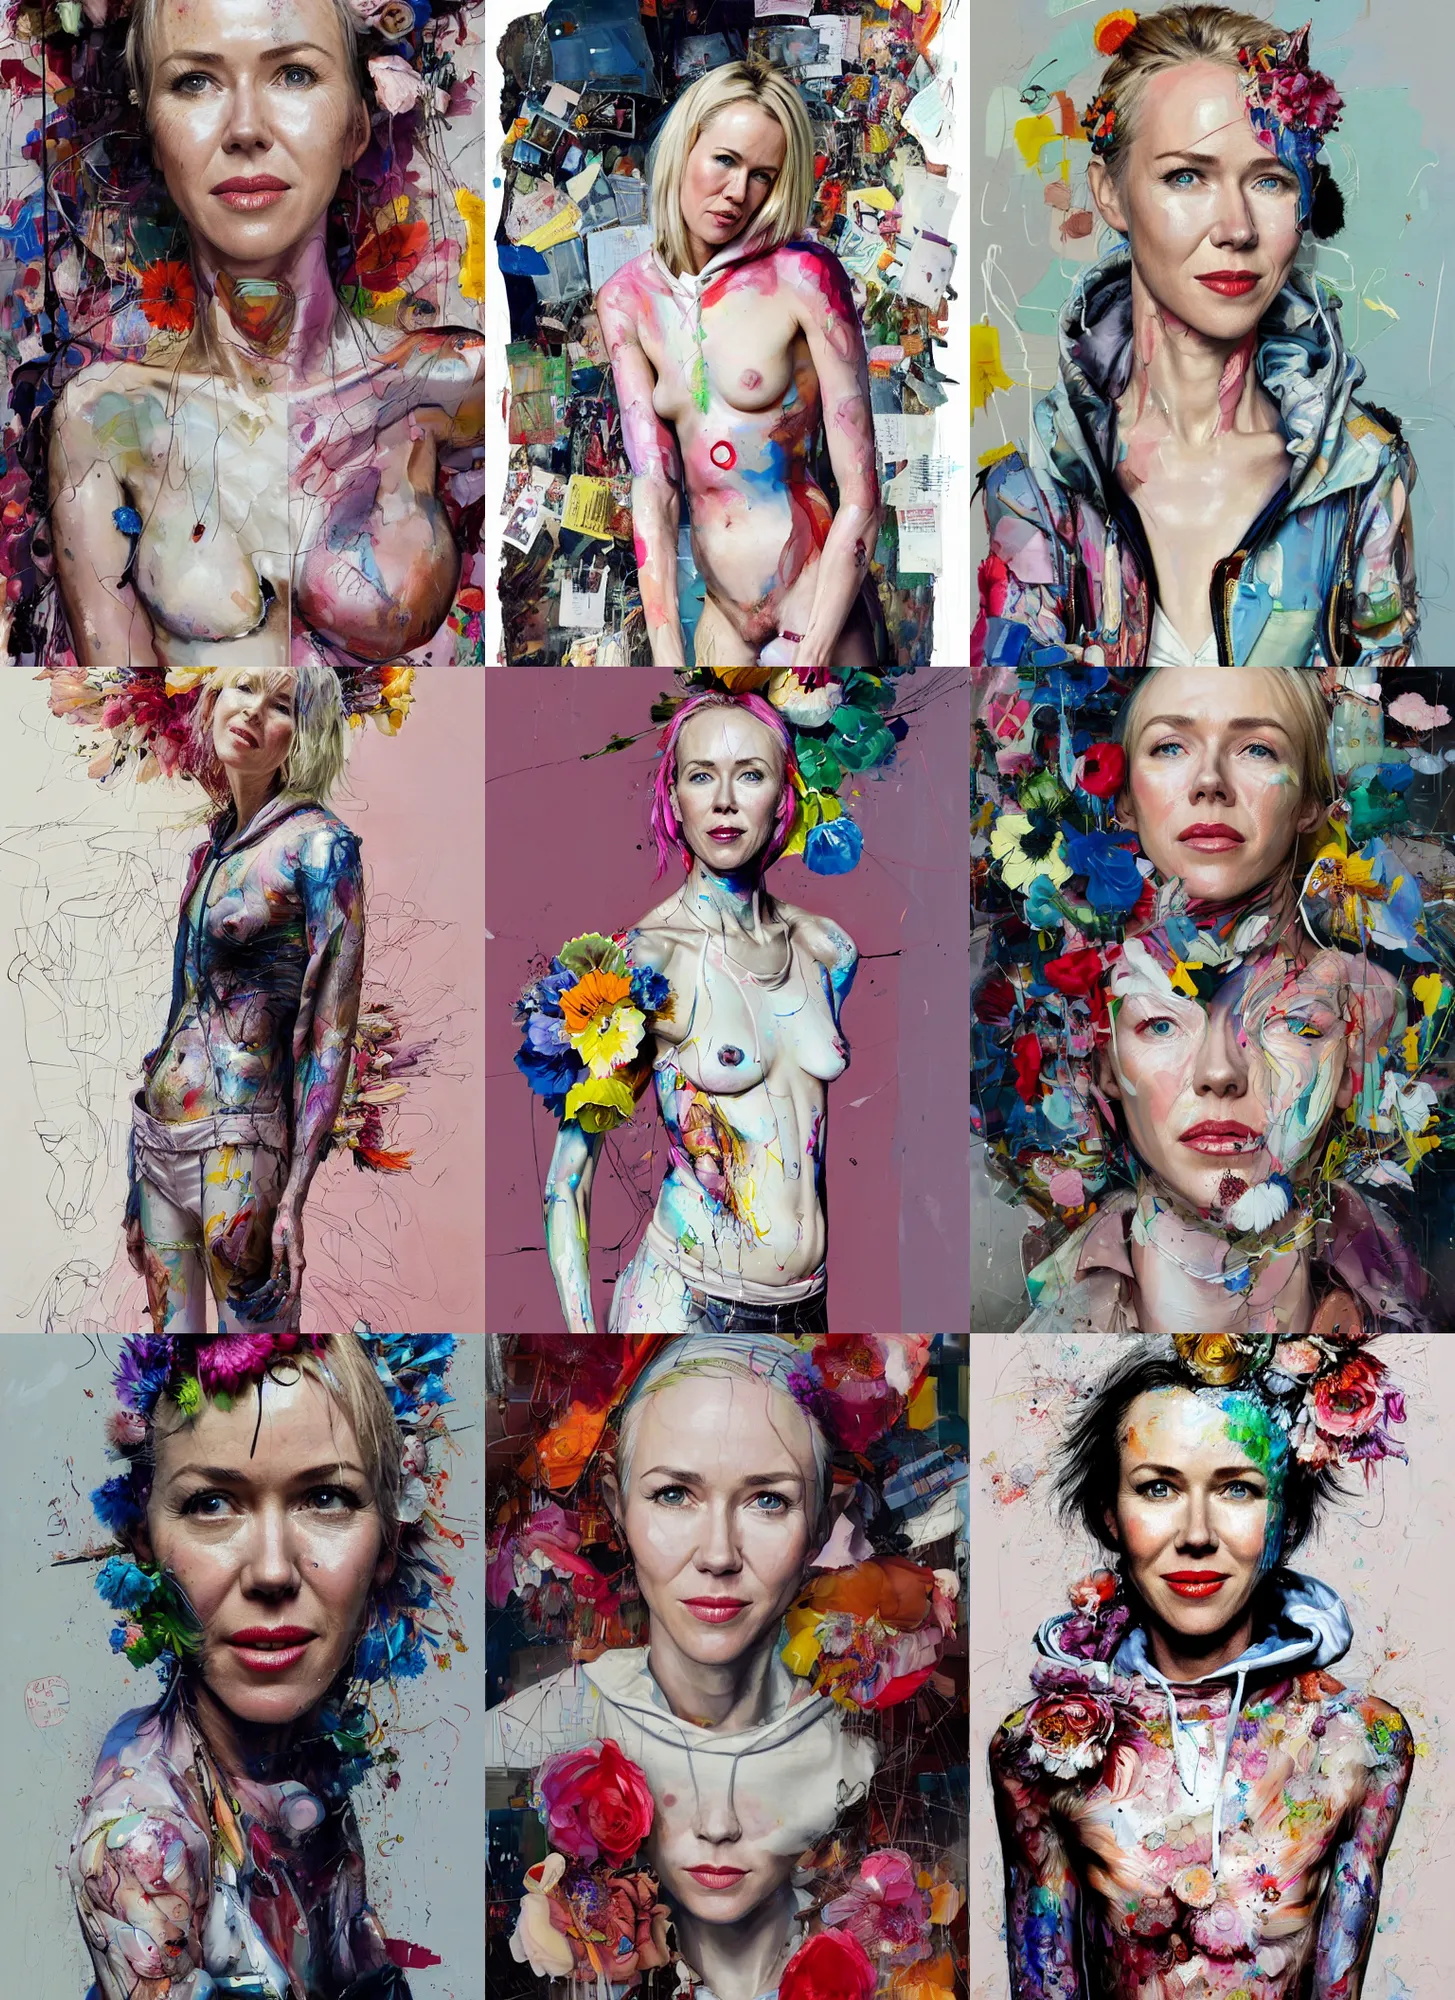 Prompt: 2 5 year old naomi watts in the style of martine johanna and! jenny saville!, wearing a hoodie, standing in a township street, street fashion outfit, haute couture fashion shoot, full figure painting by john berkey, david choe, ismail inceoglu, decorative flowers, 2 4 mm, die antwoord ( yoladi visser )